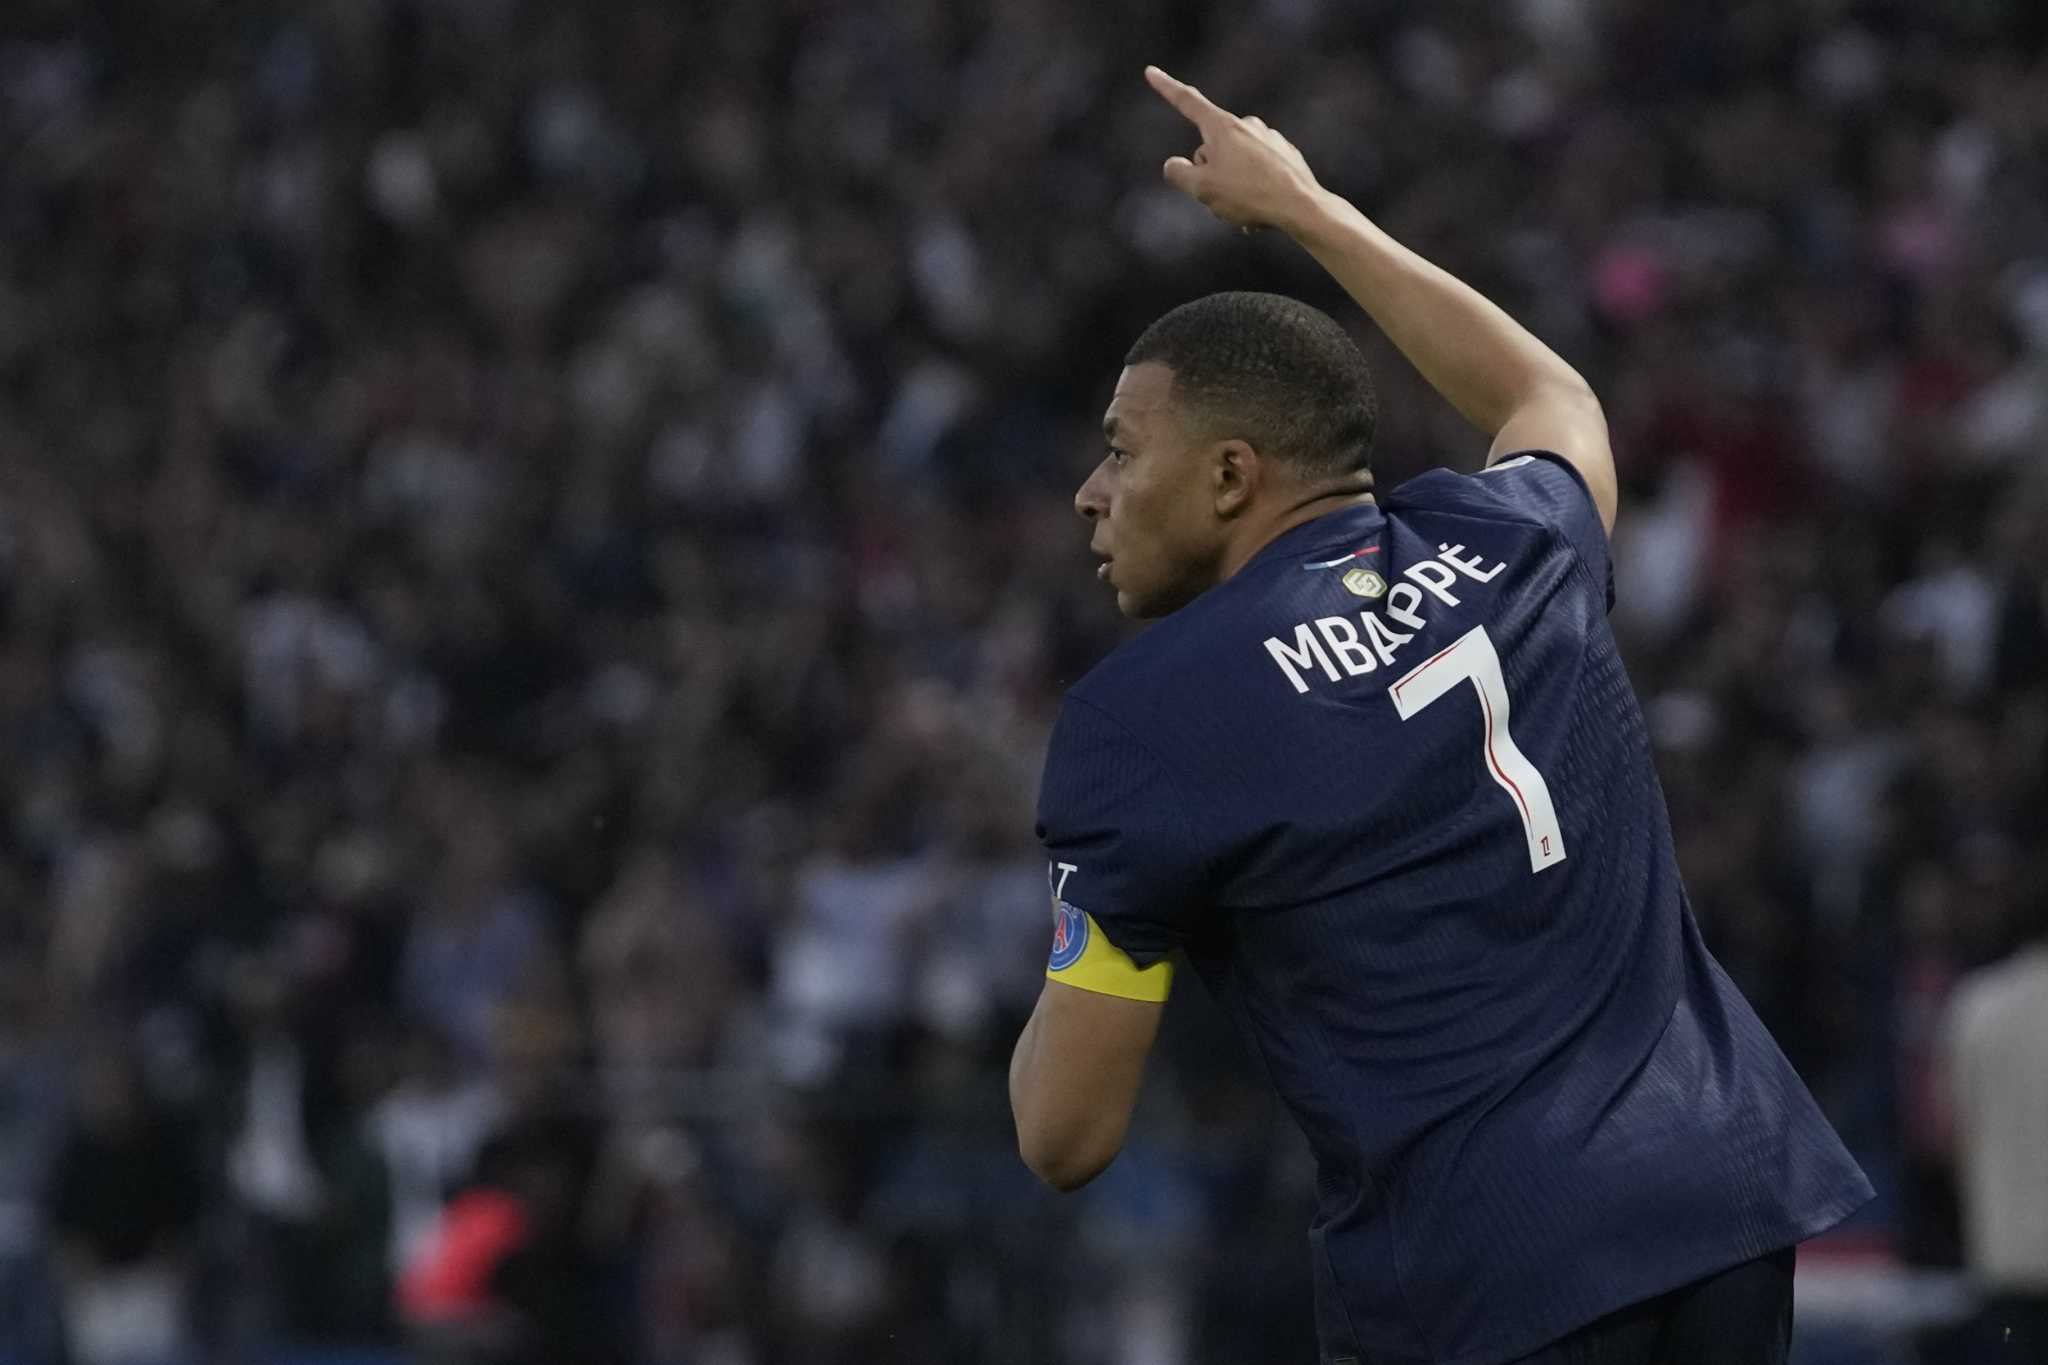 Mbappé left out of PSG squad for final league game amid reports he attended Cannes film festival